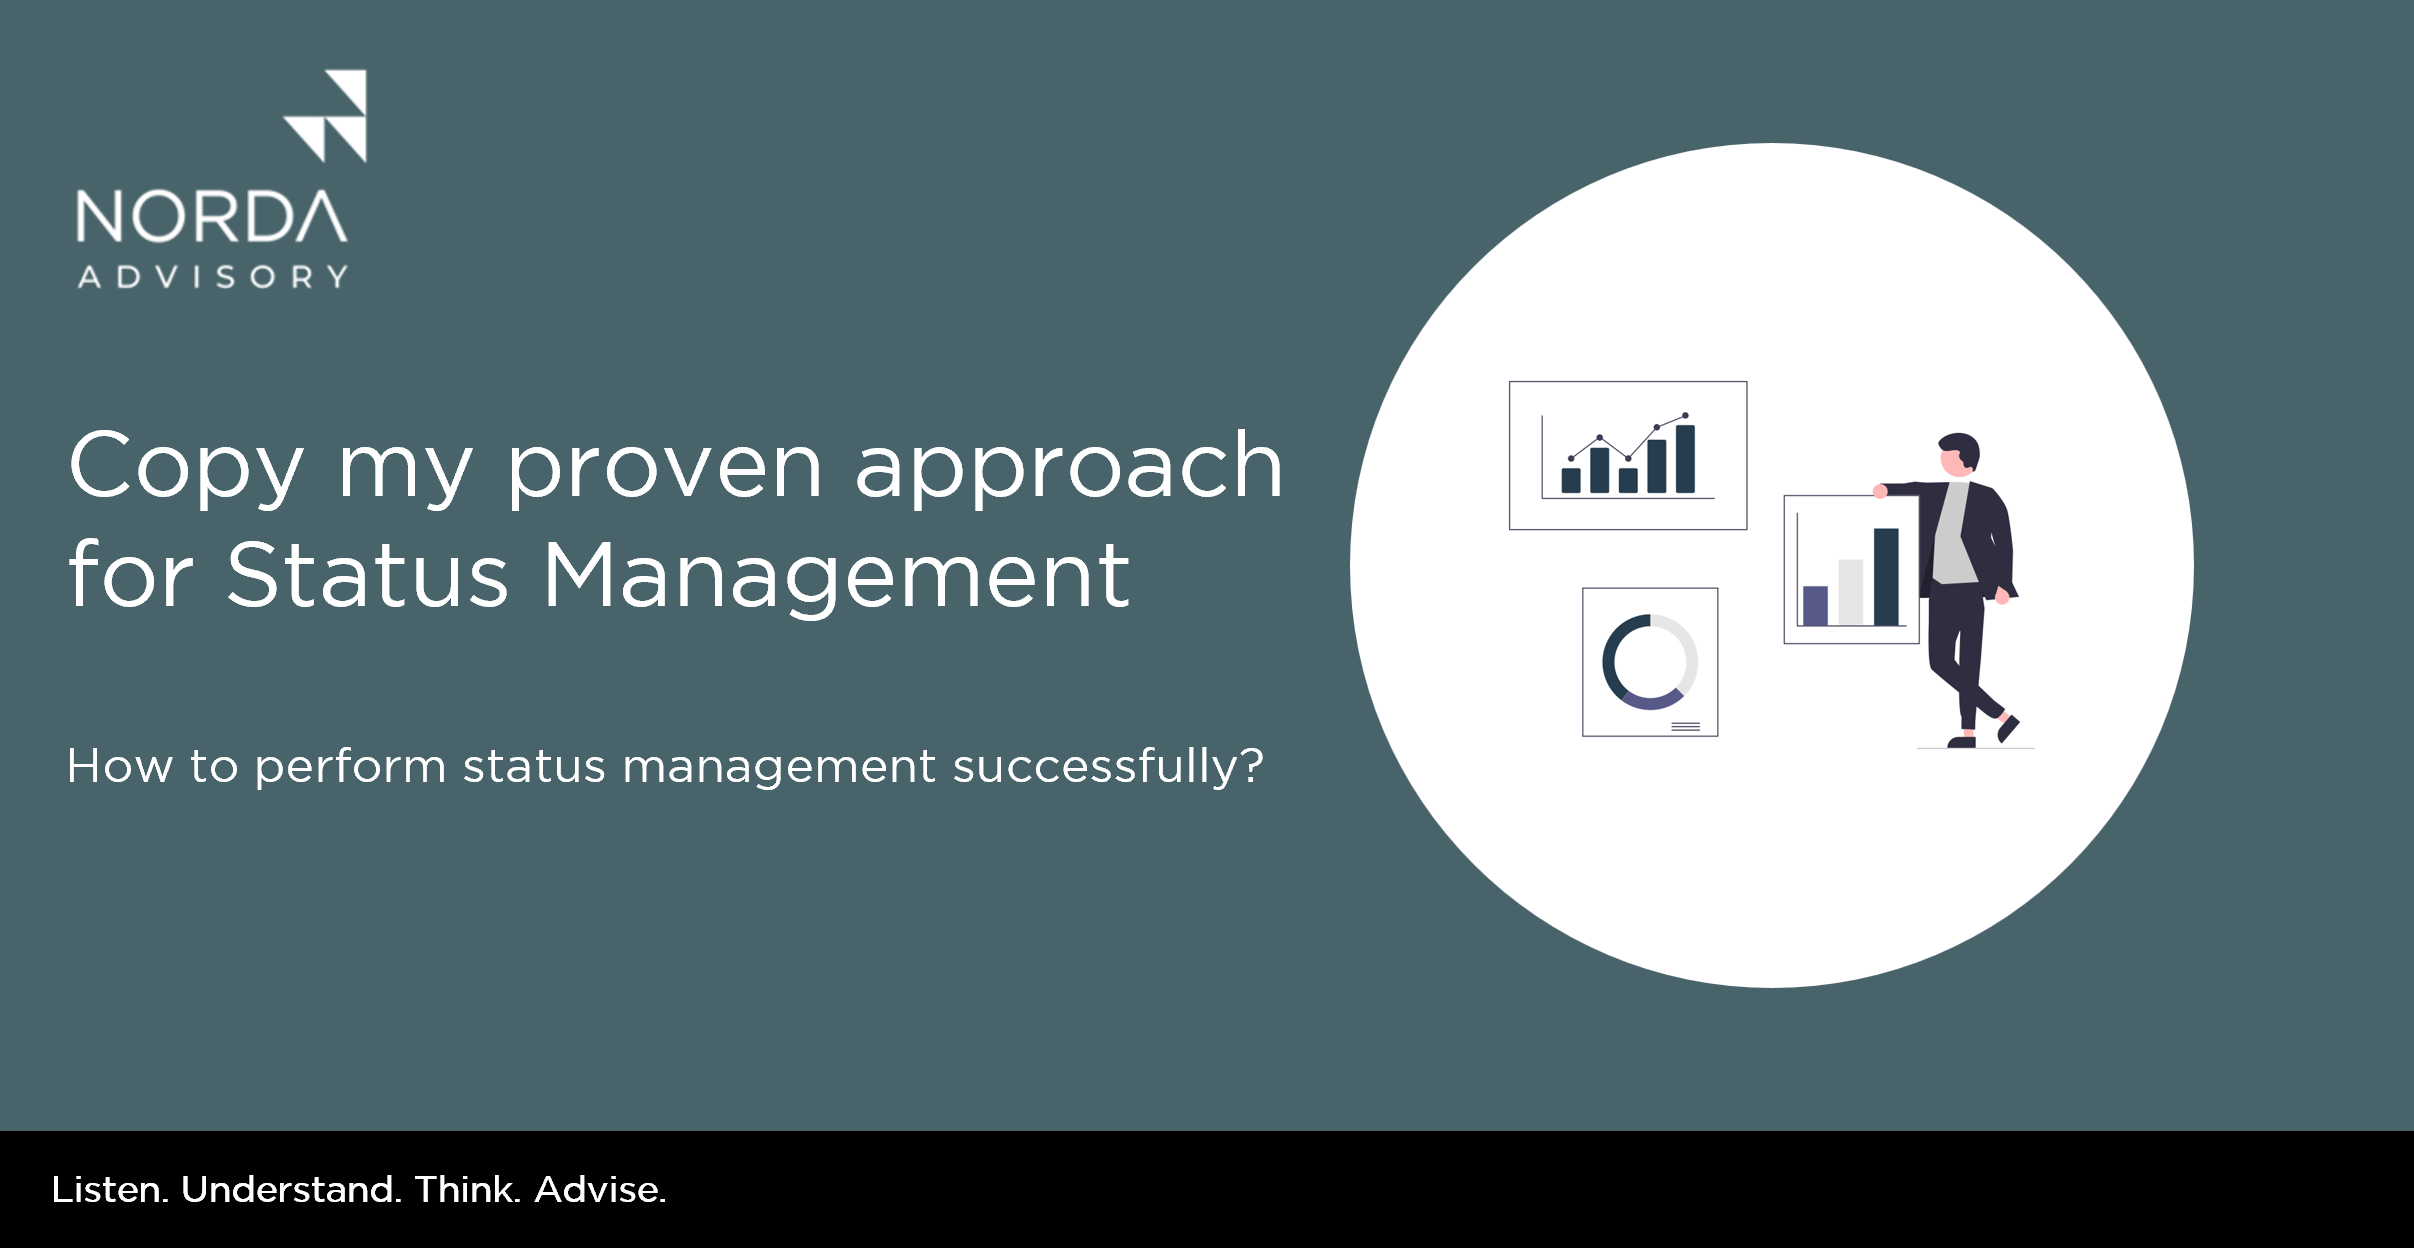 Copy my proven approach for Status Management